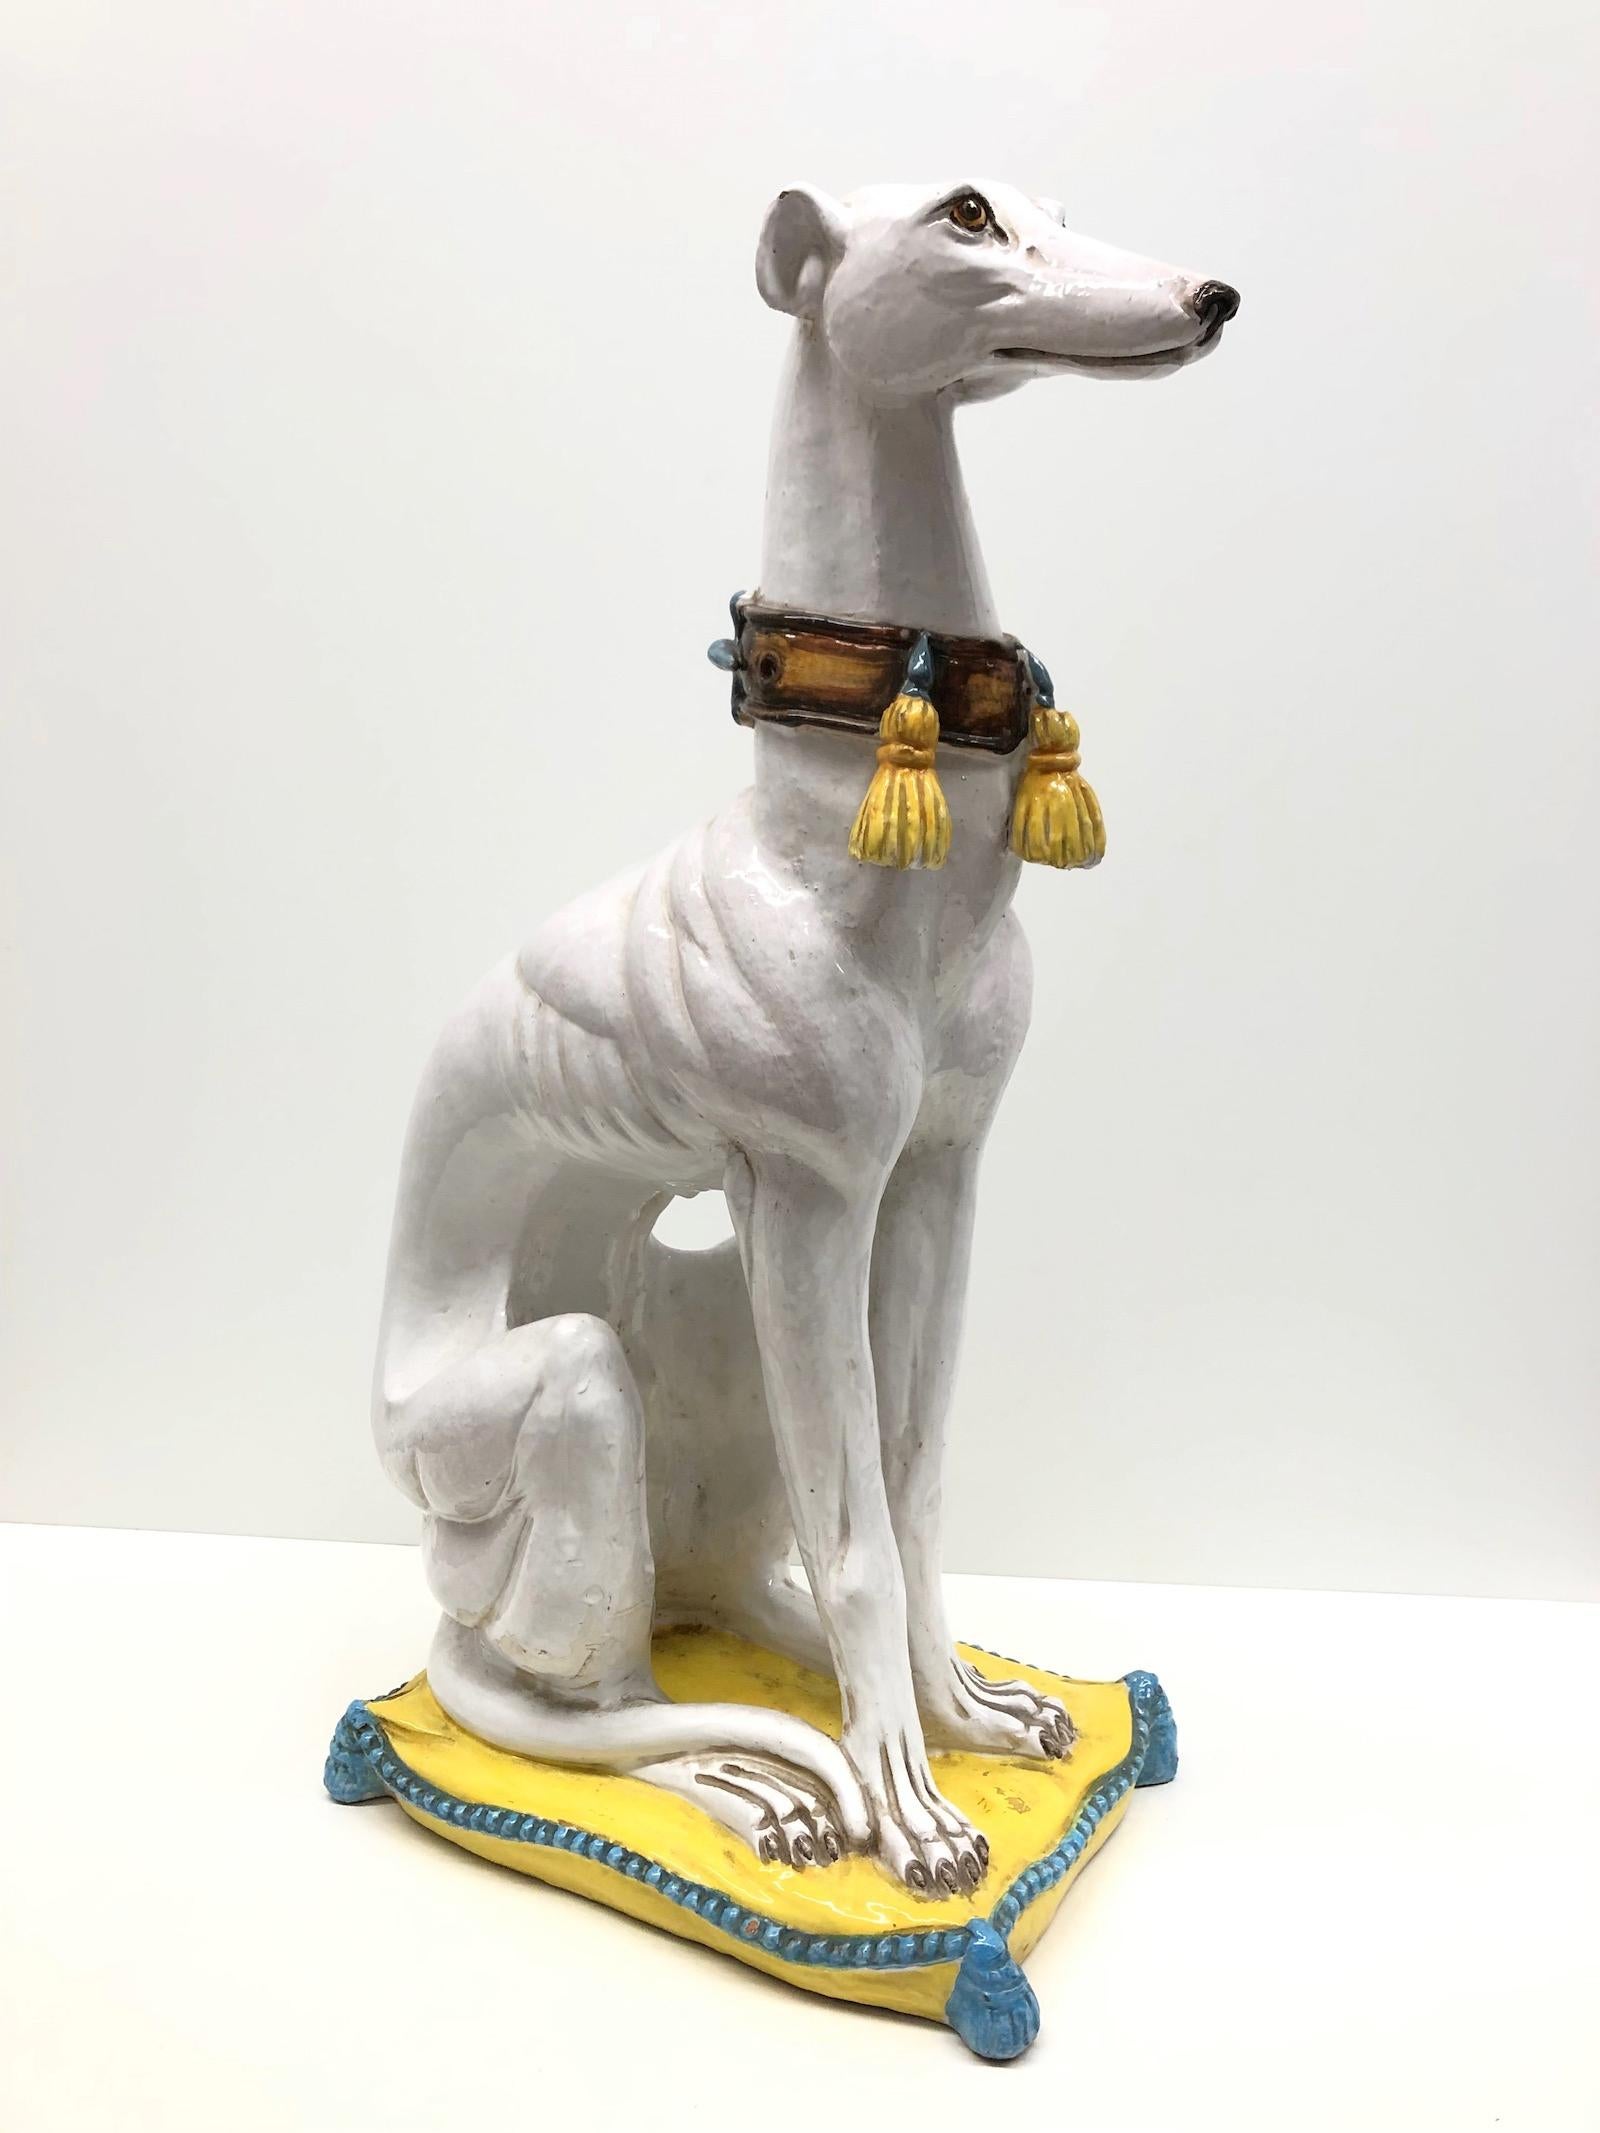 Classic early 1960s Italian Greyhound Majolica Dog Statue Figurine. Nice addition to your room or entry hall. Made of majolica ceramic, hand painted.